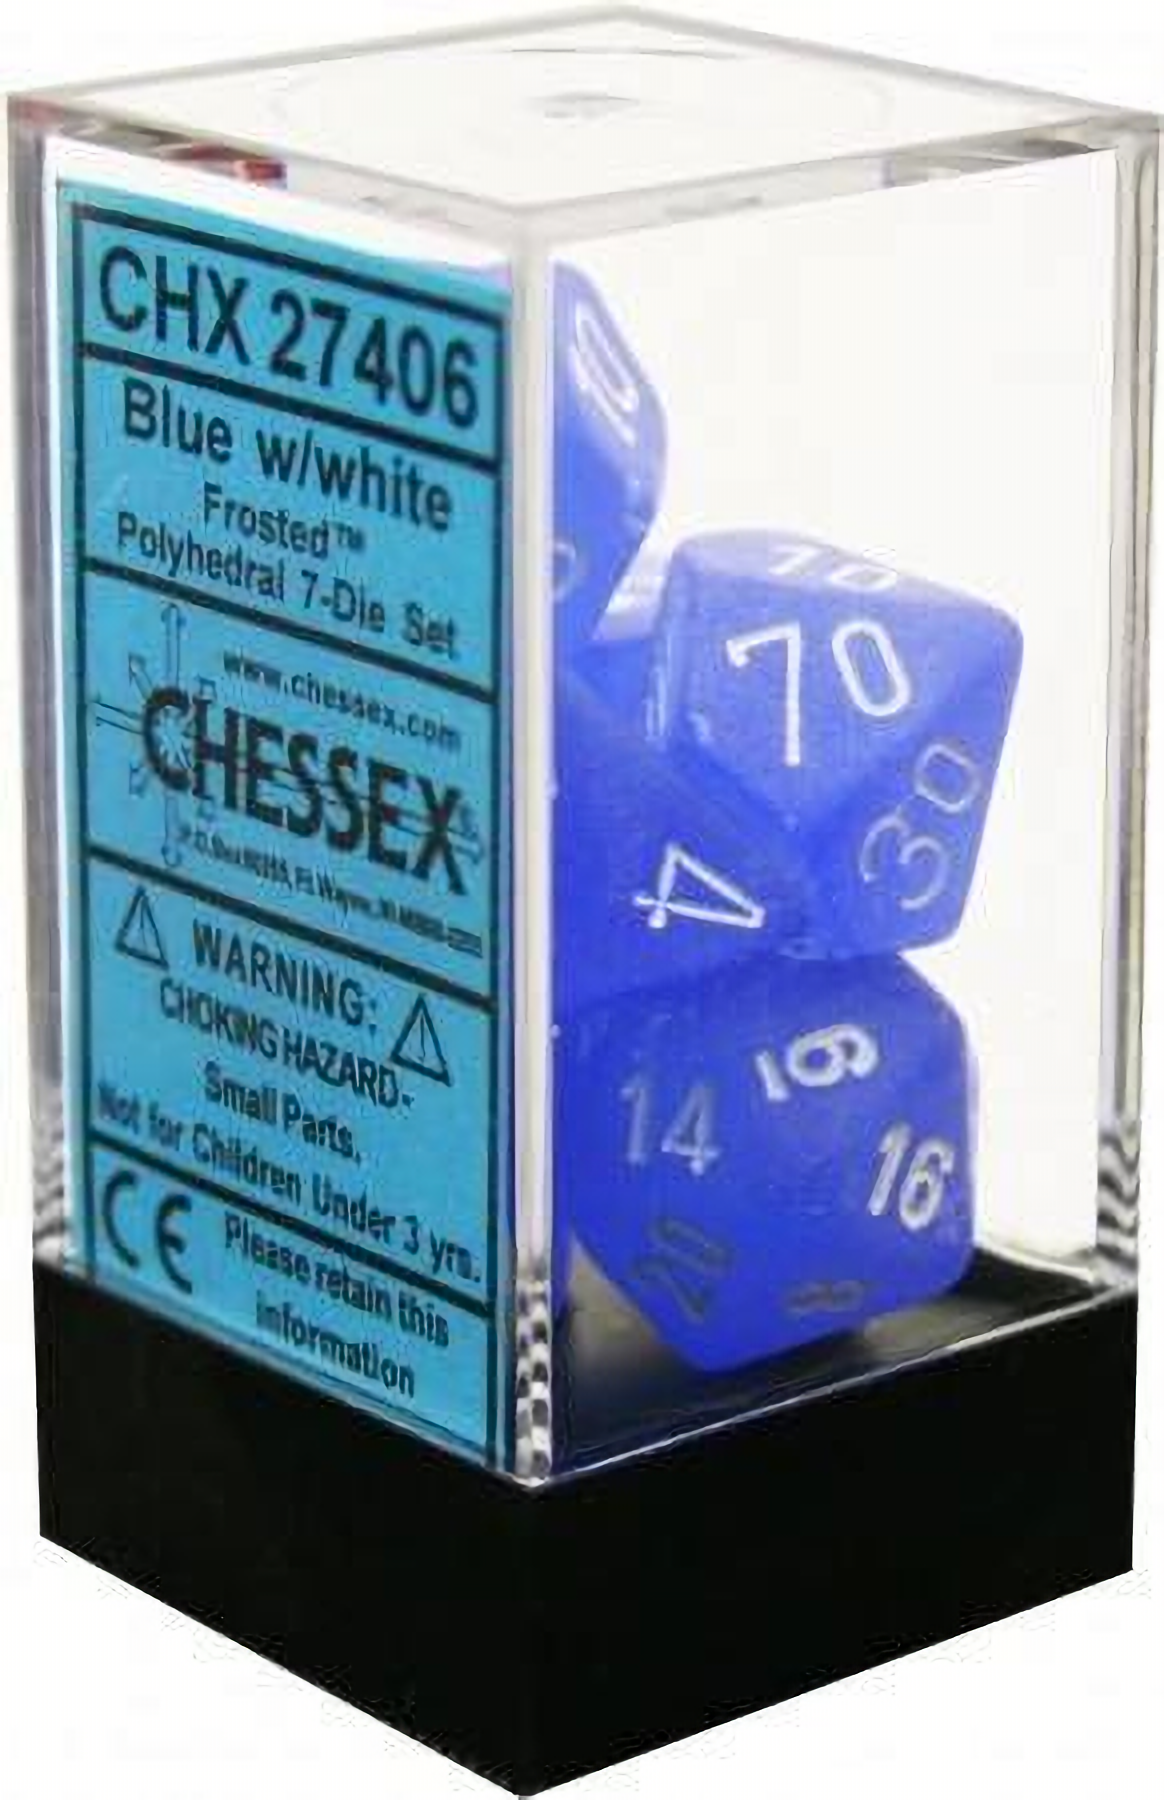 Chessex - Frosted Polyhedral 7-Die Set - Blue/White (CHX27406)